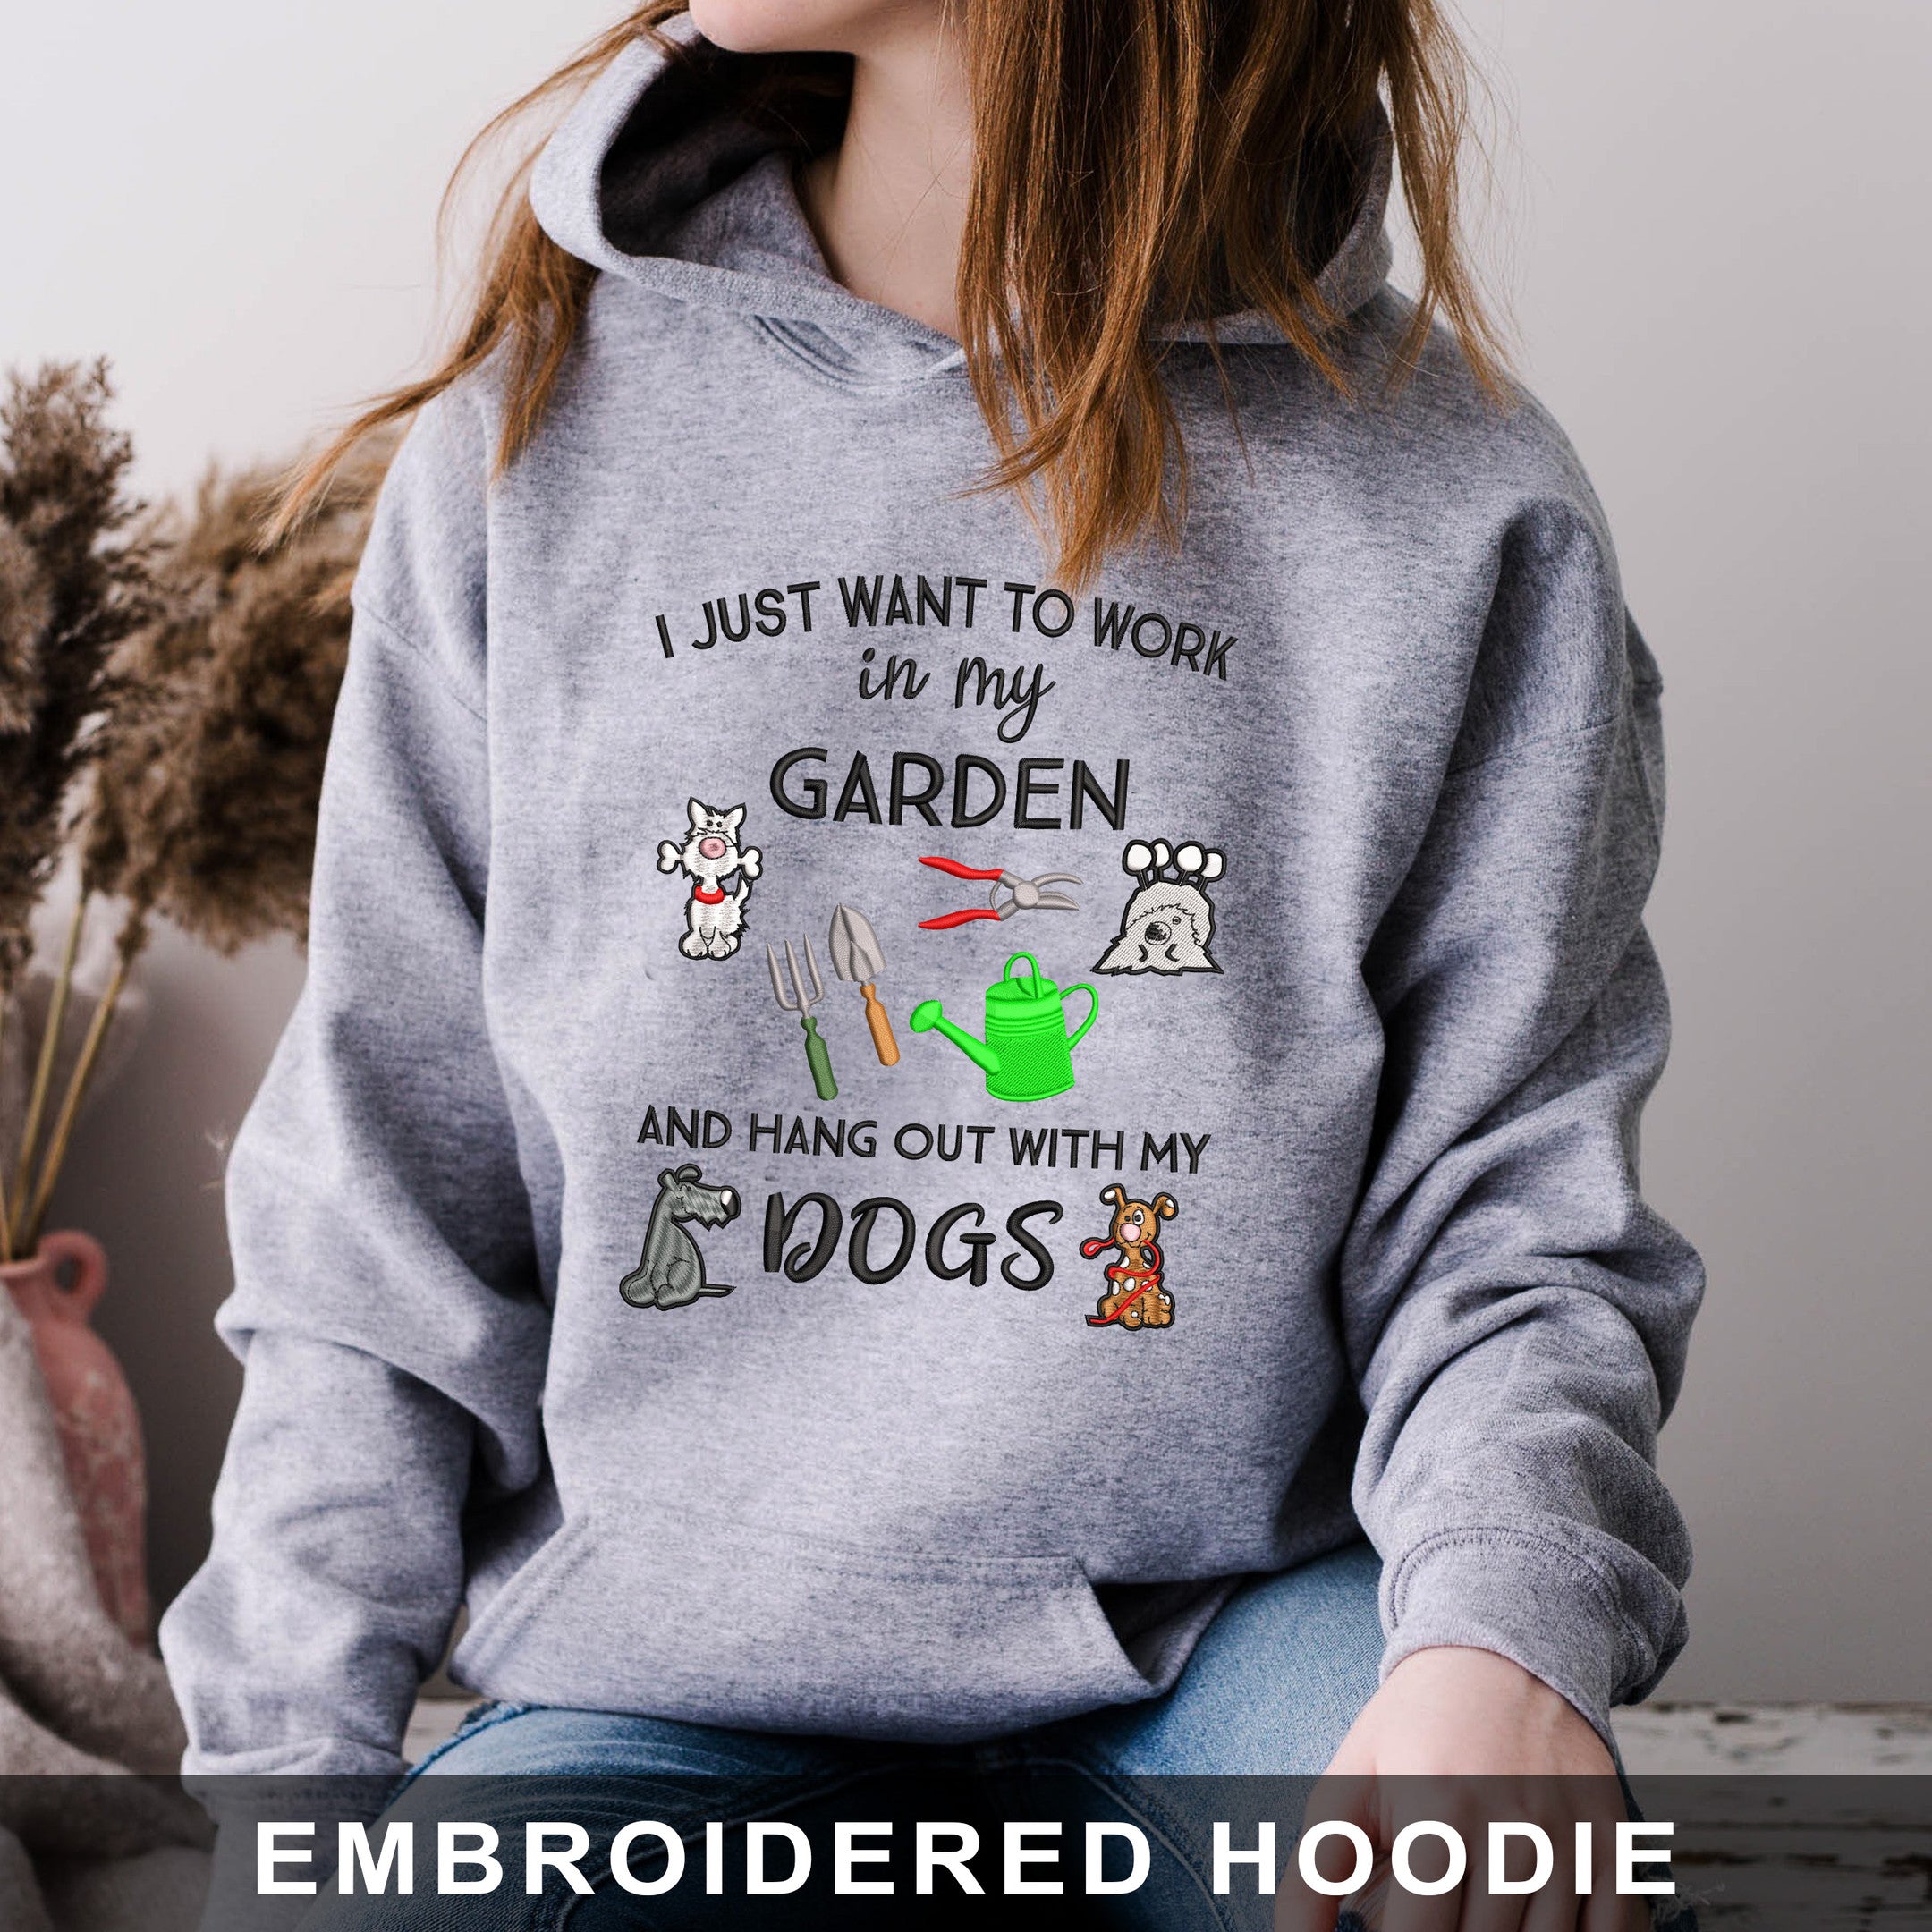 Garden And Hang out with Dogs Embroidered Shirt